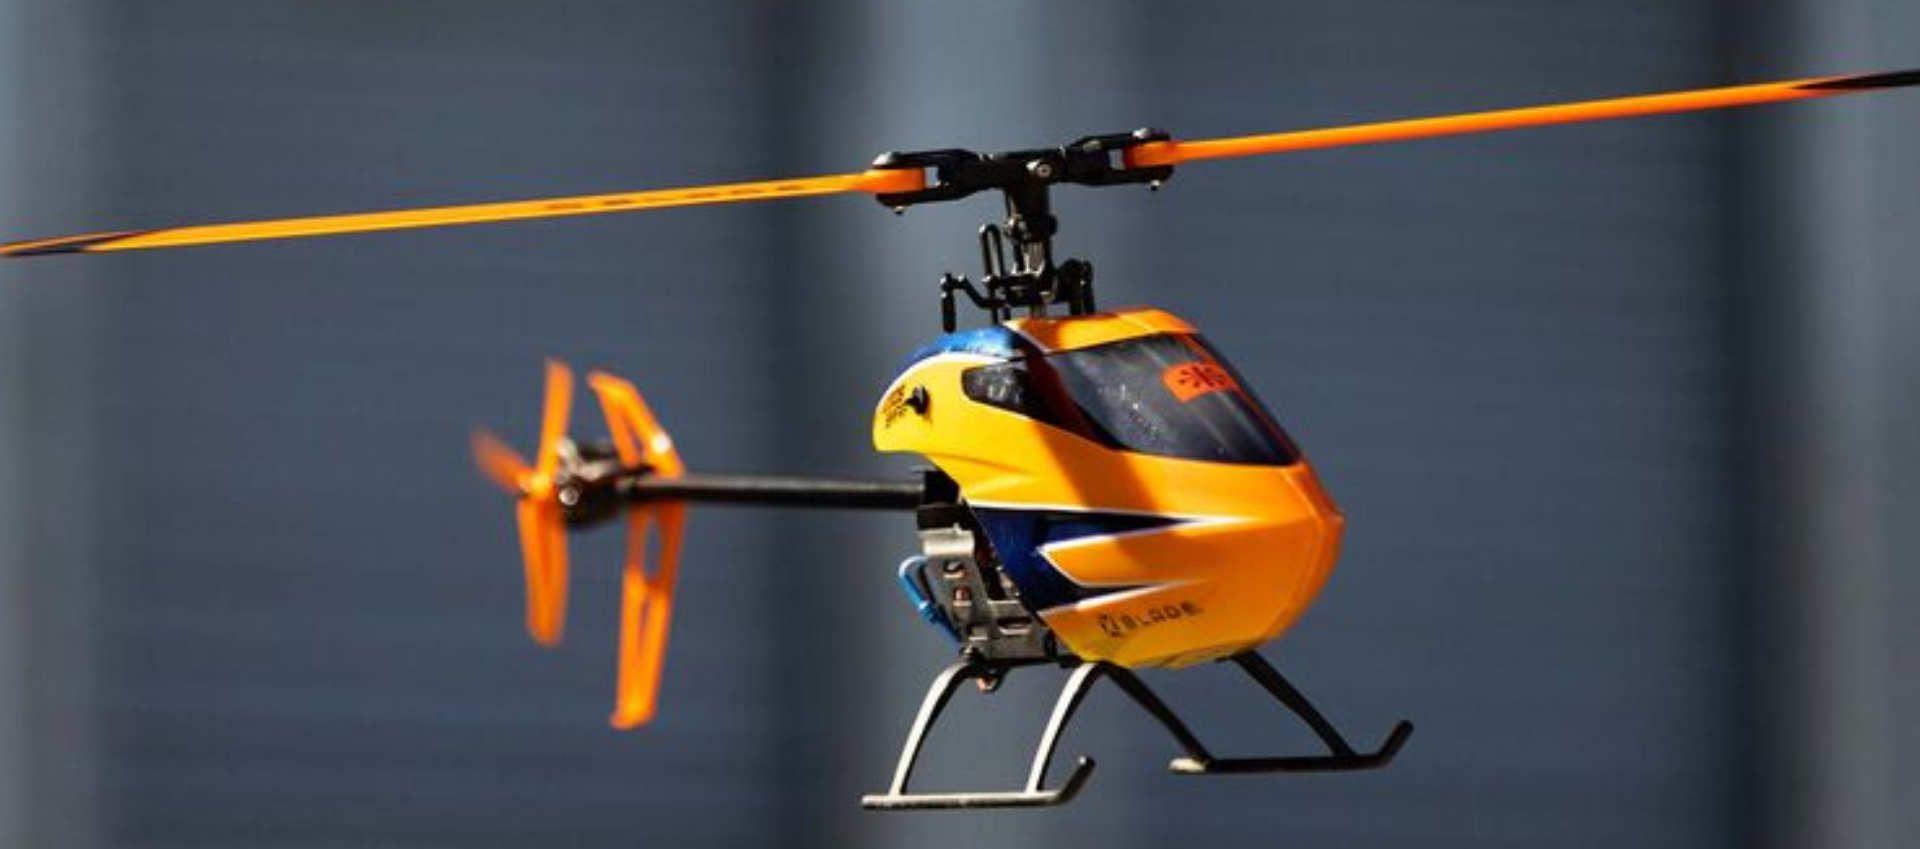 700 Scale Rc Helicopters: Choosing the Perfect 700 Scale RC Helicopter: Tips and Resources